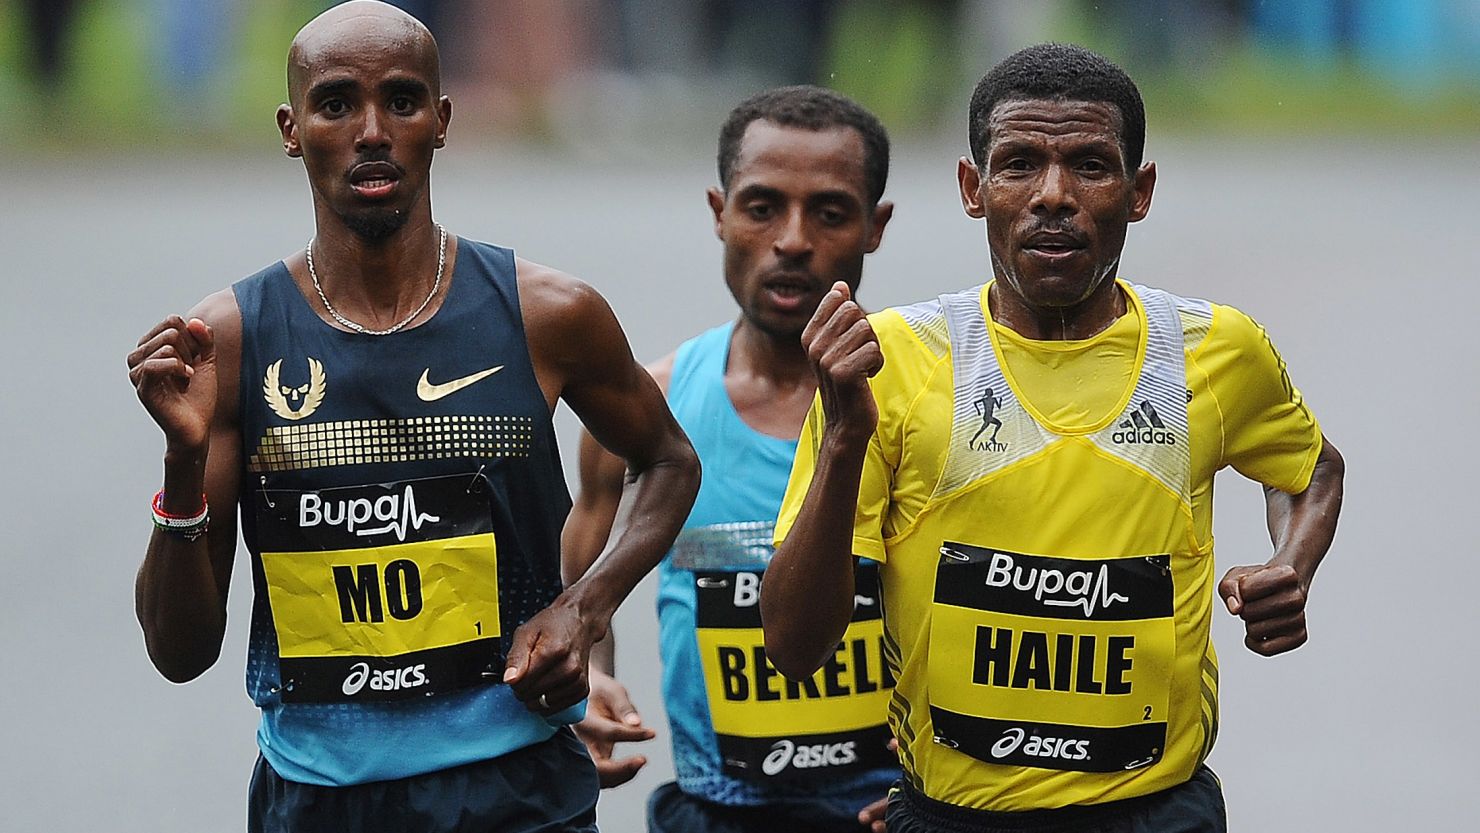 Farah  (L) competes alongside Gebrselassie at the 2013 Great North Run.